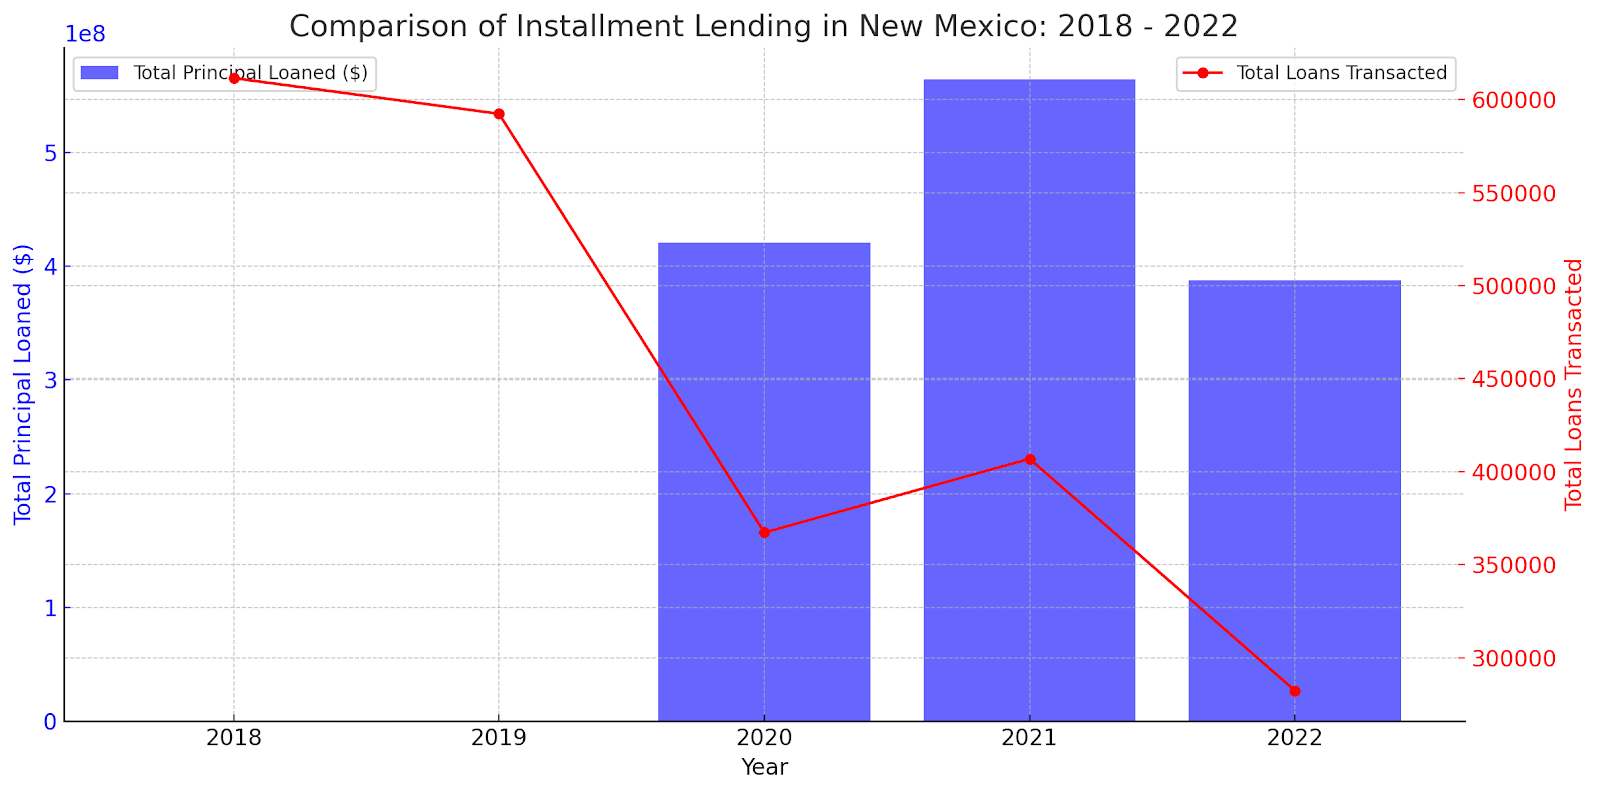 Financial Drought in New Mexico: Navigating the Bank Deserts Post House Bill 132